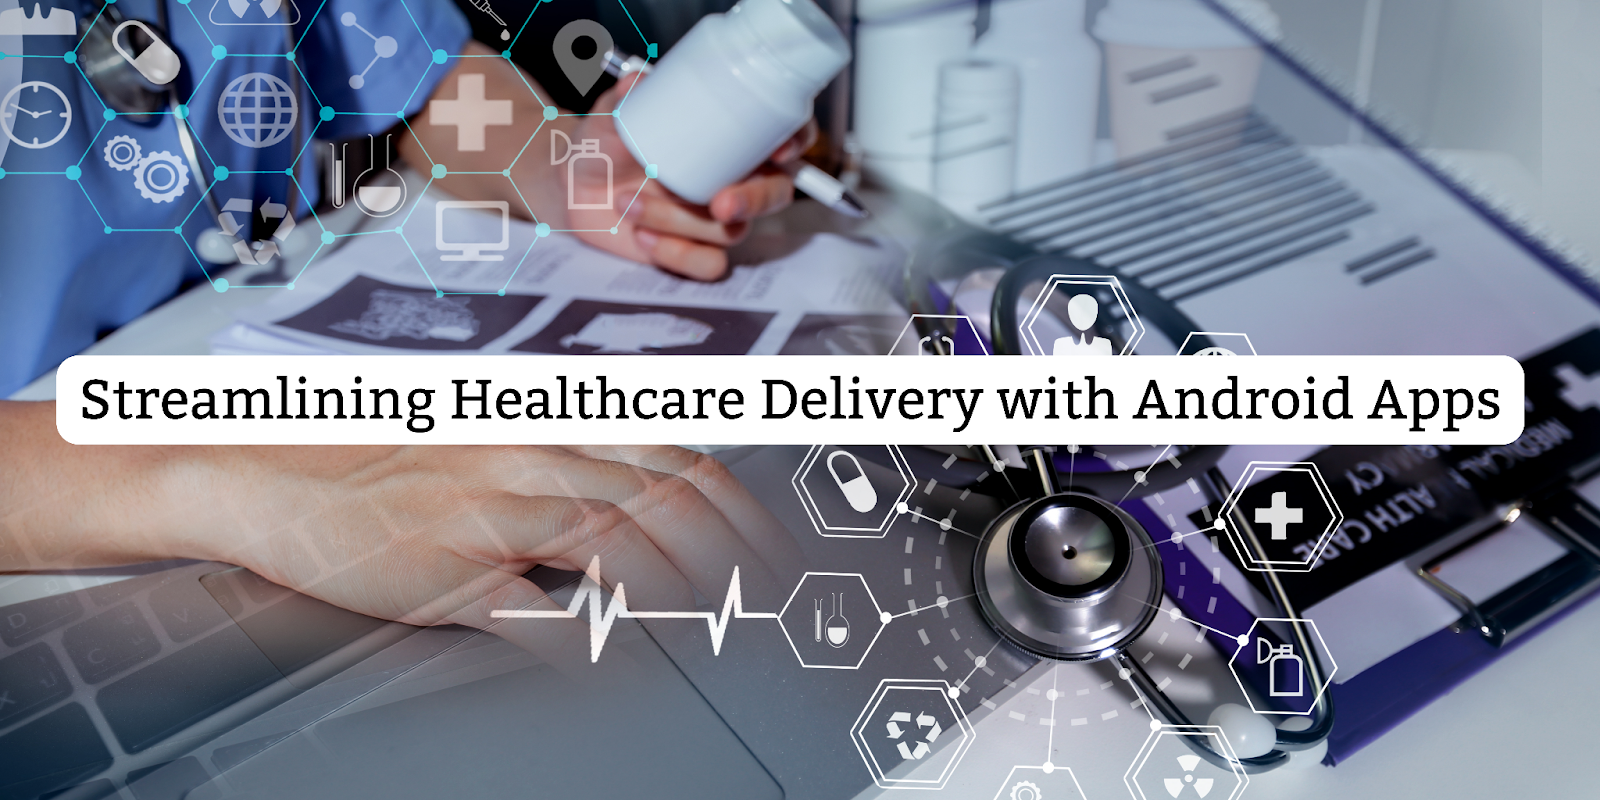 Streamlining Healthcare Delivery with Android Apps